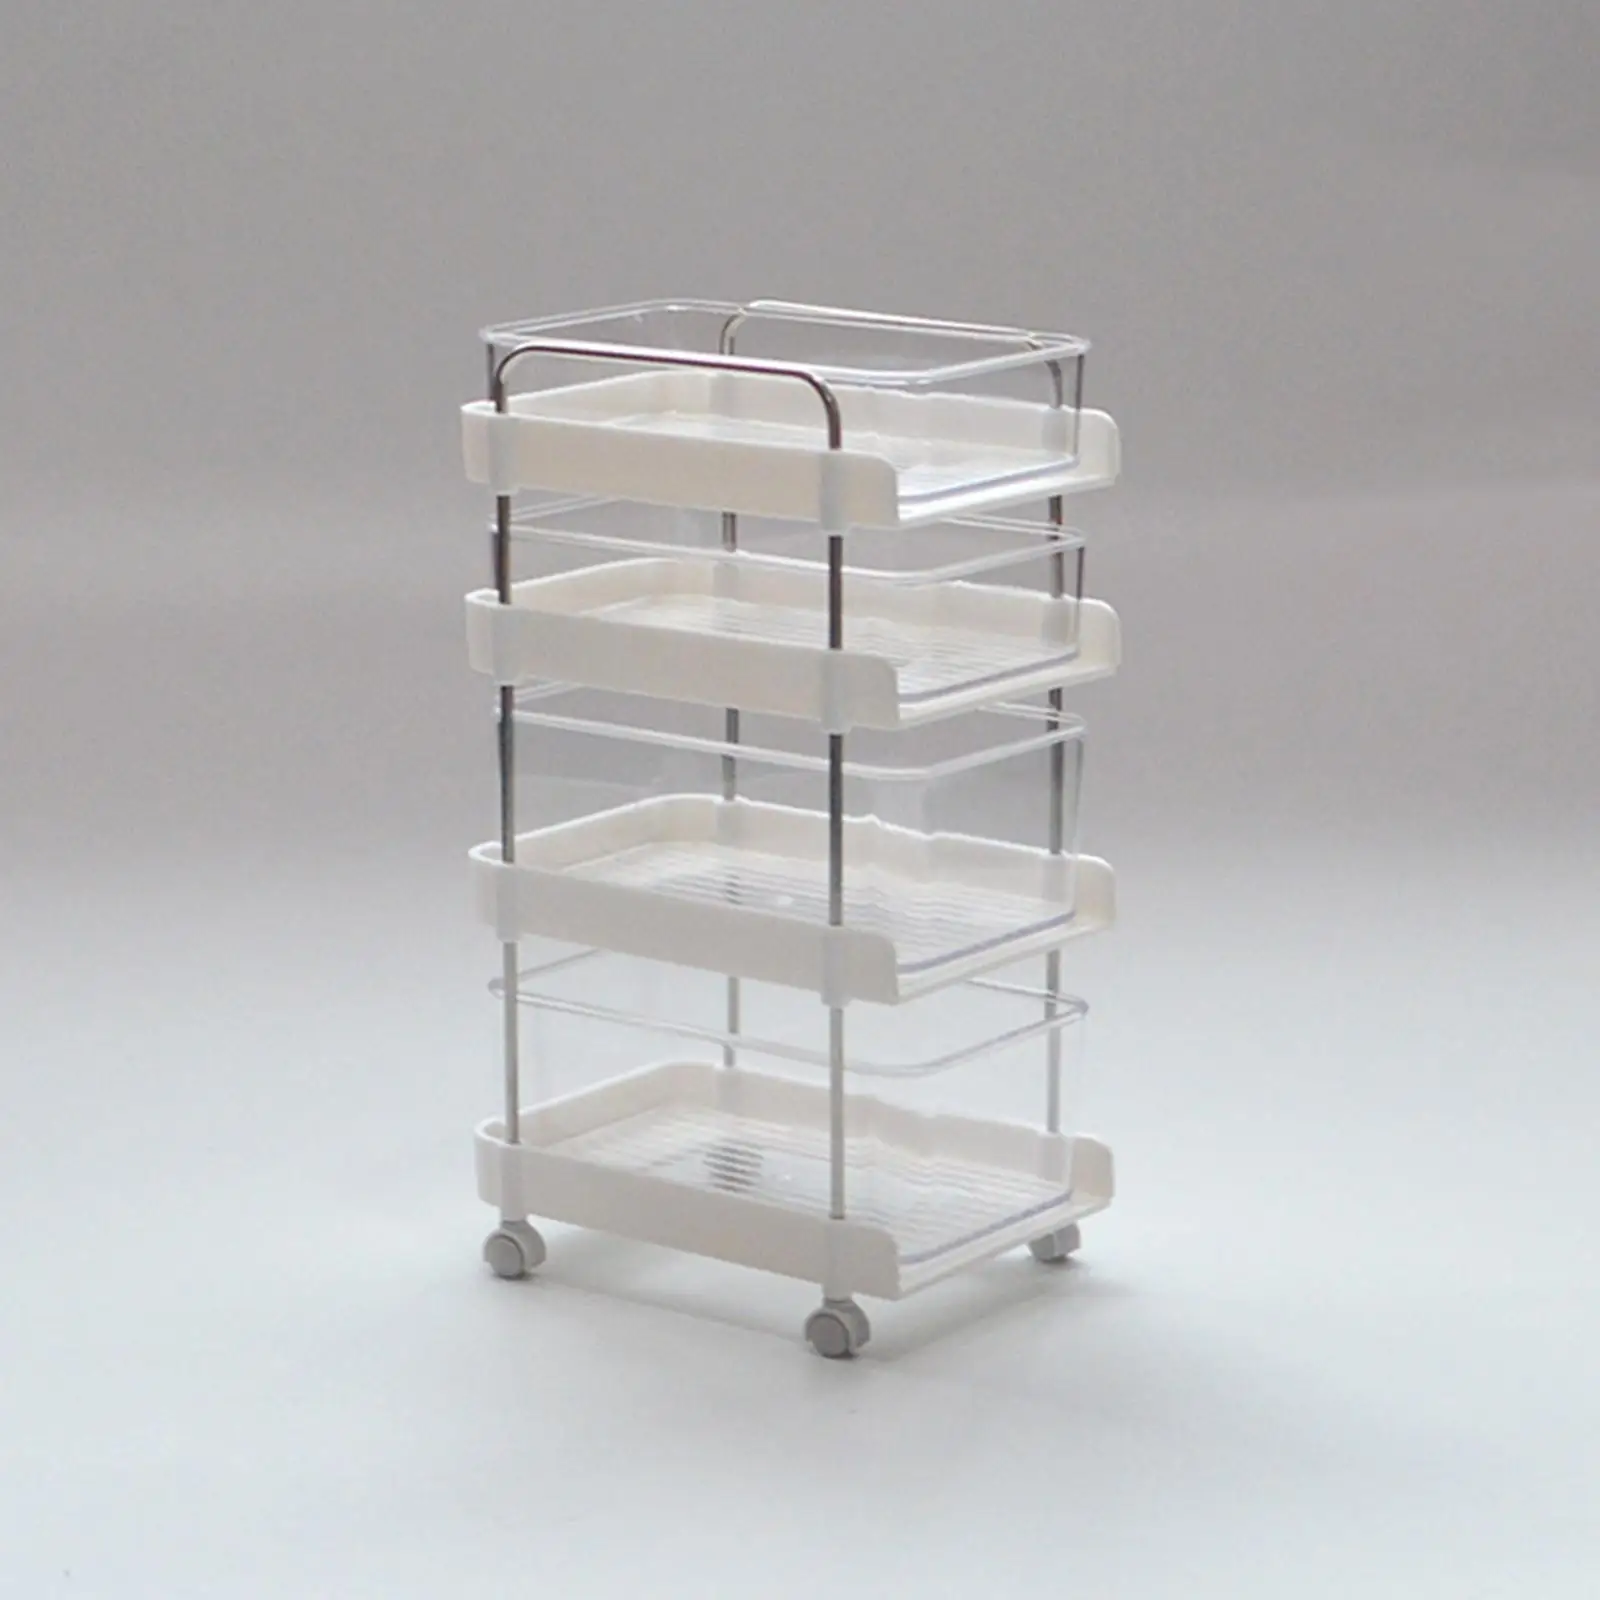 1/6 Dollhouse Simulated Simulation Storage Rack with Wheels for Accessories Building DIY Projects Architectural Micro Landscape